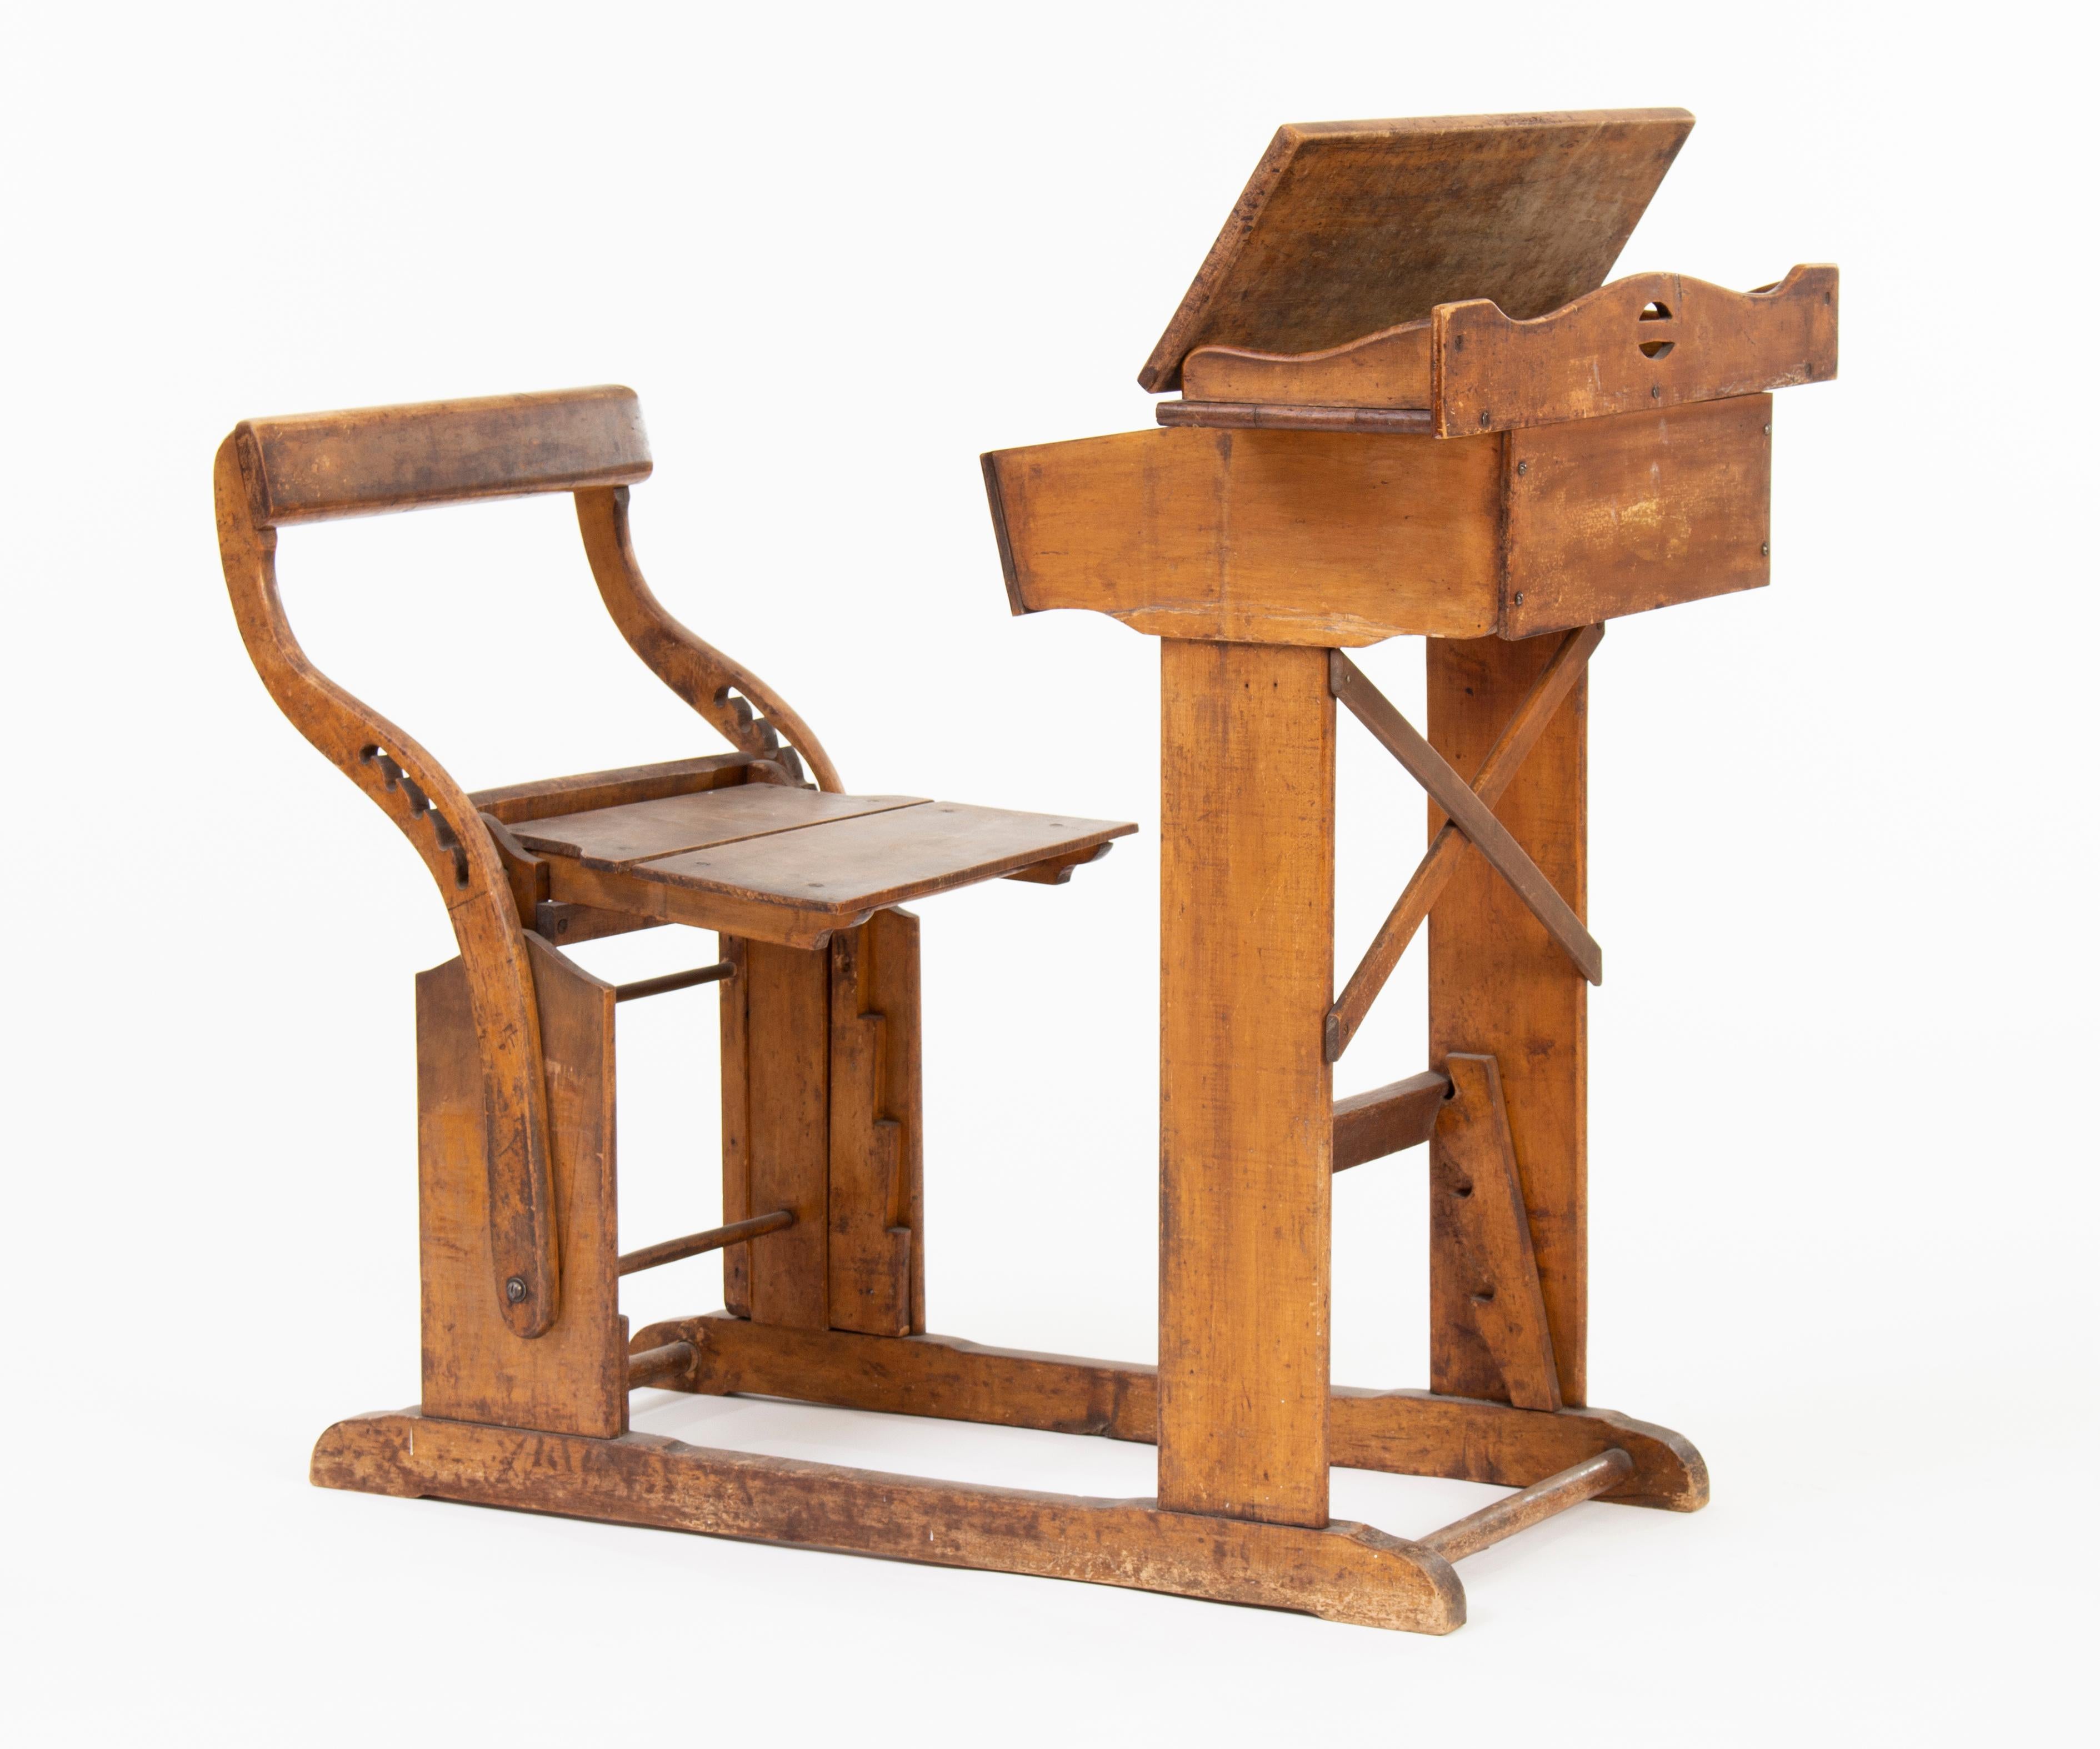 Antique children's school bench and desk, with inkholder.
In original condition, provoking the traditional Hungarian school athmosphere from the first half of the 20th century.